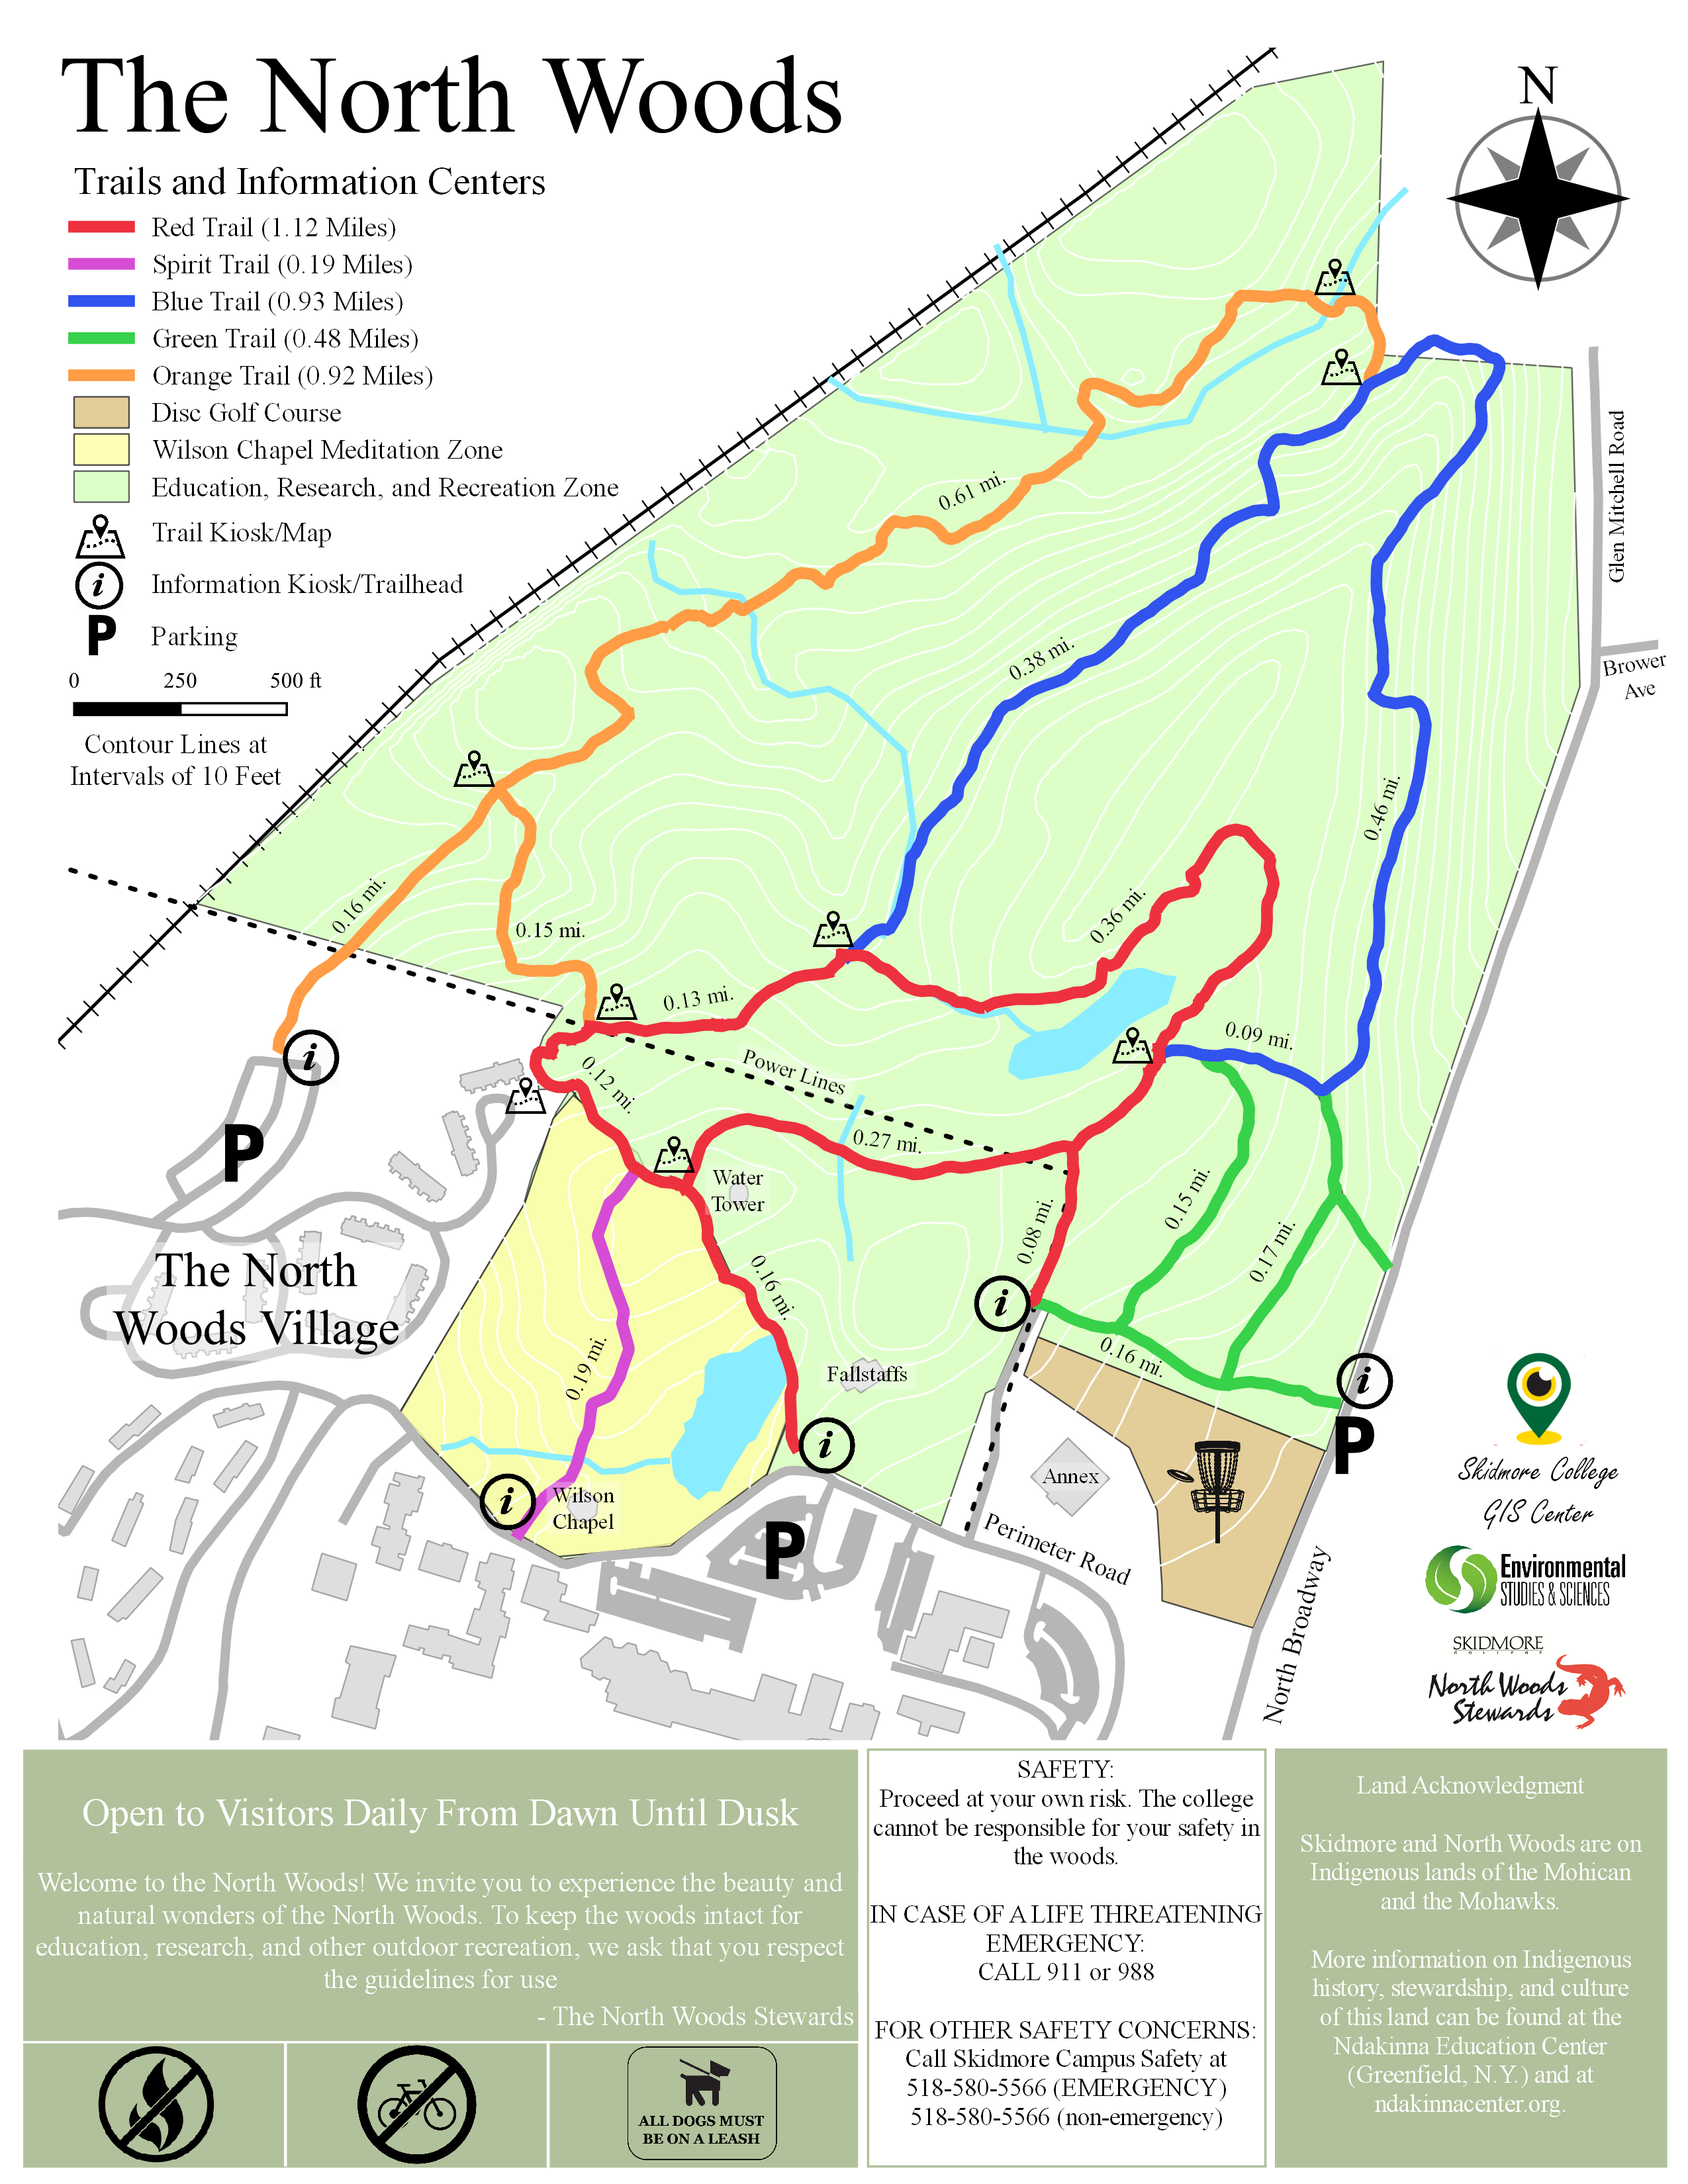 The orange and blue trail wrap around the perimeter of the property, with a red loop through the middle, a green trail on the eastern most side, and a short purple entrance trail to the south.